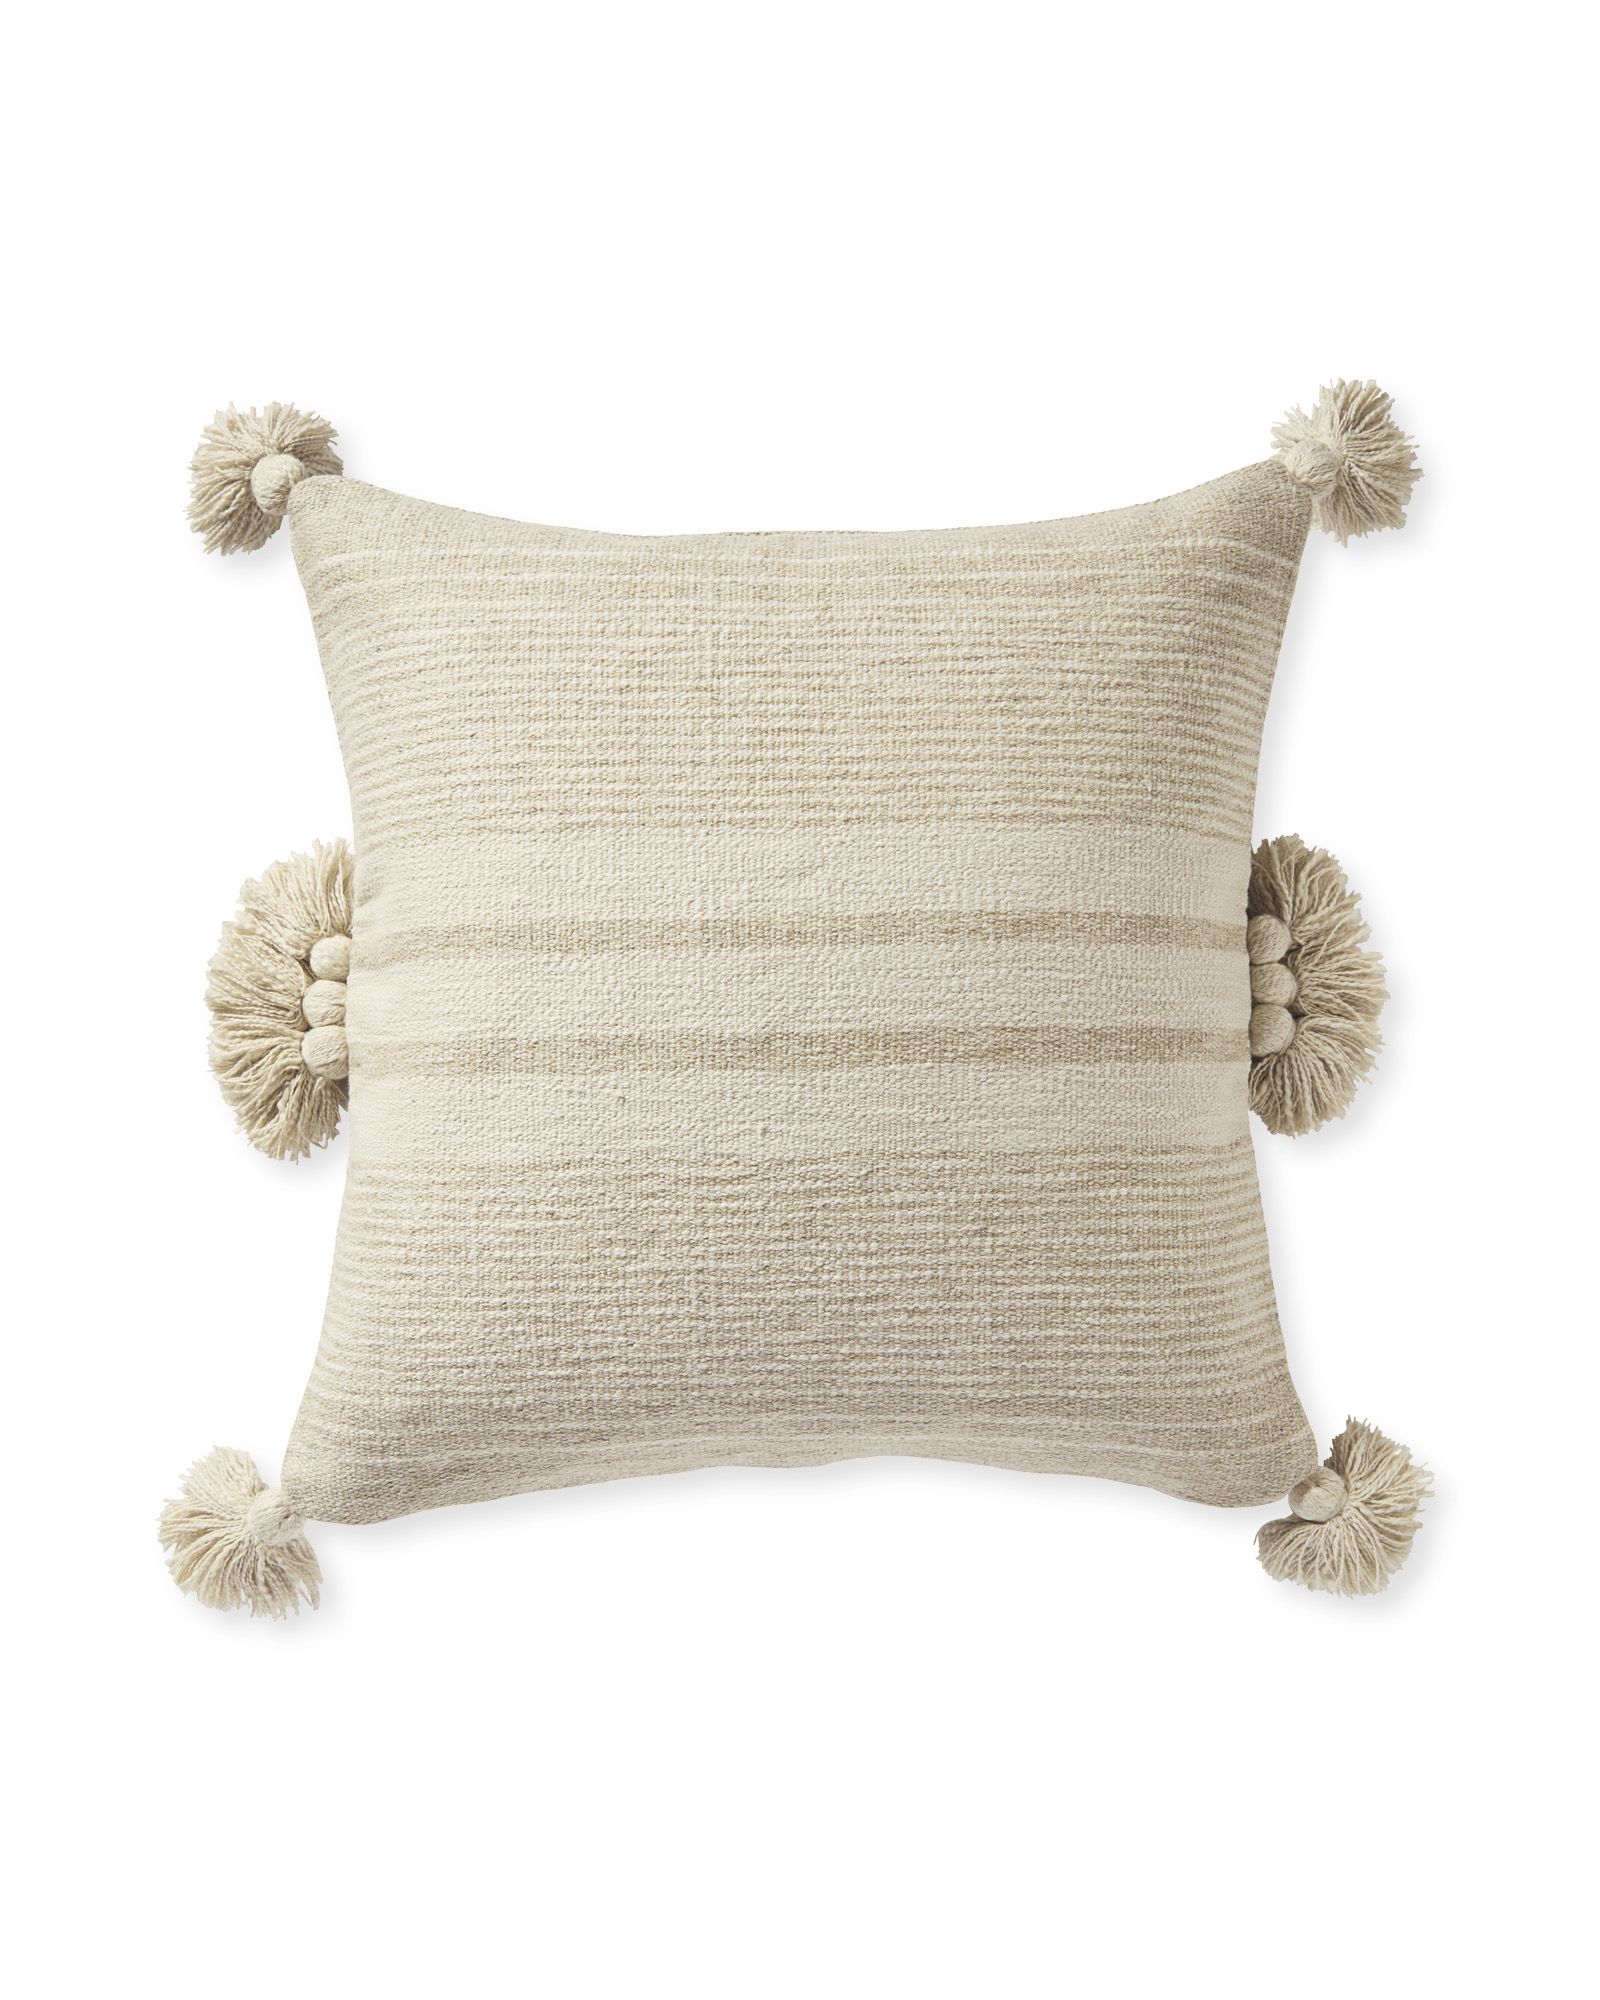 Surfside Pillow Cover | Serena and Lily